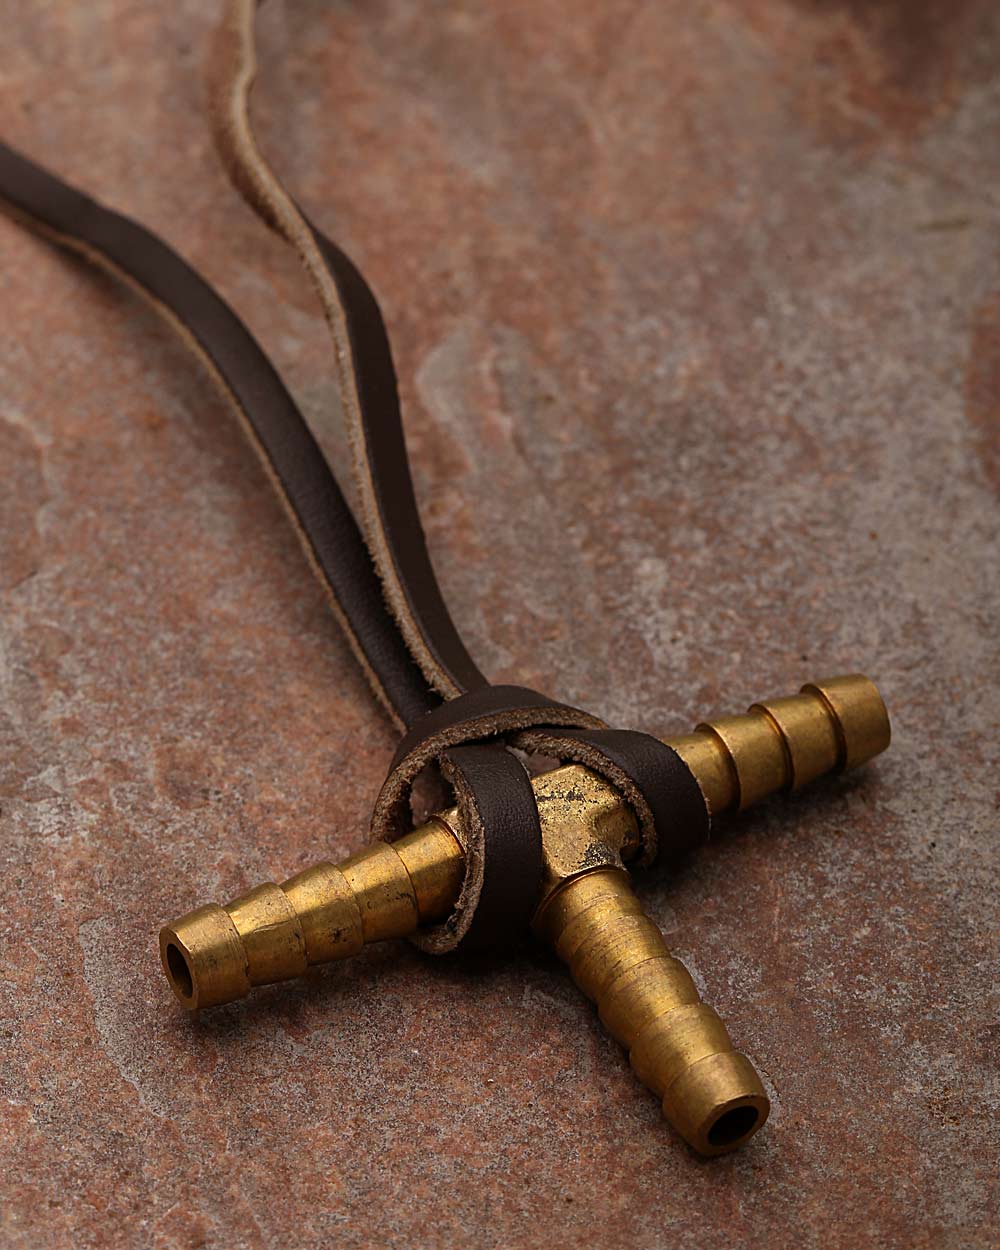 T Joint Detailing Pendant With Chain For Men